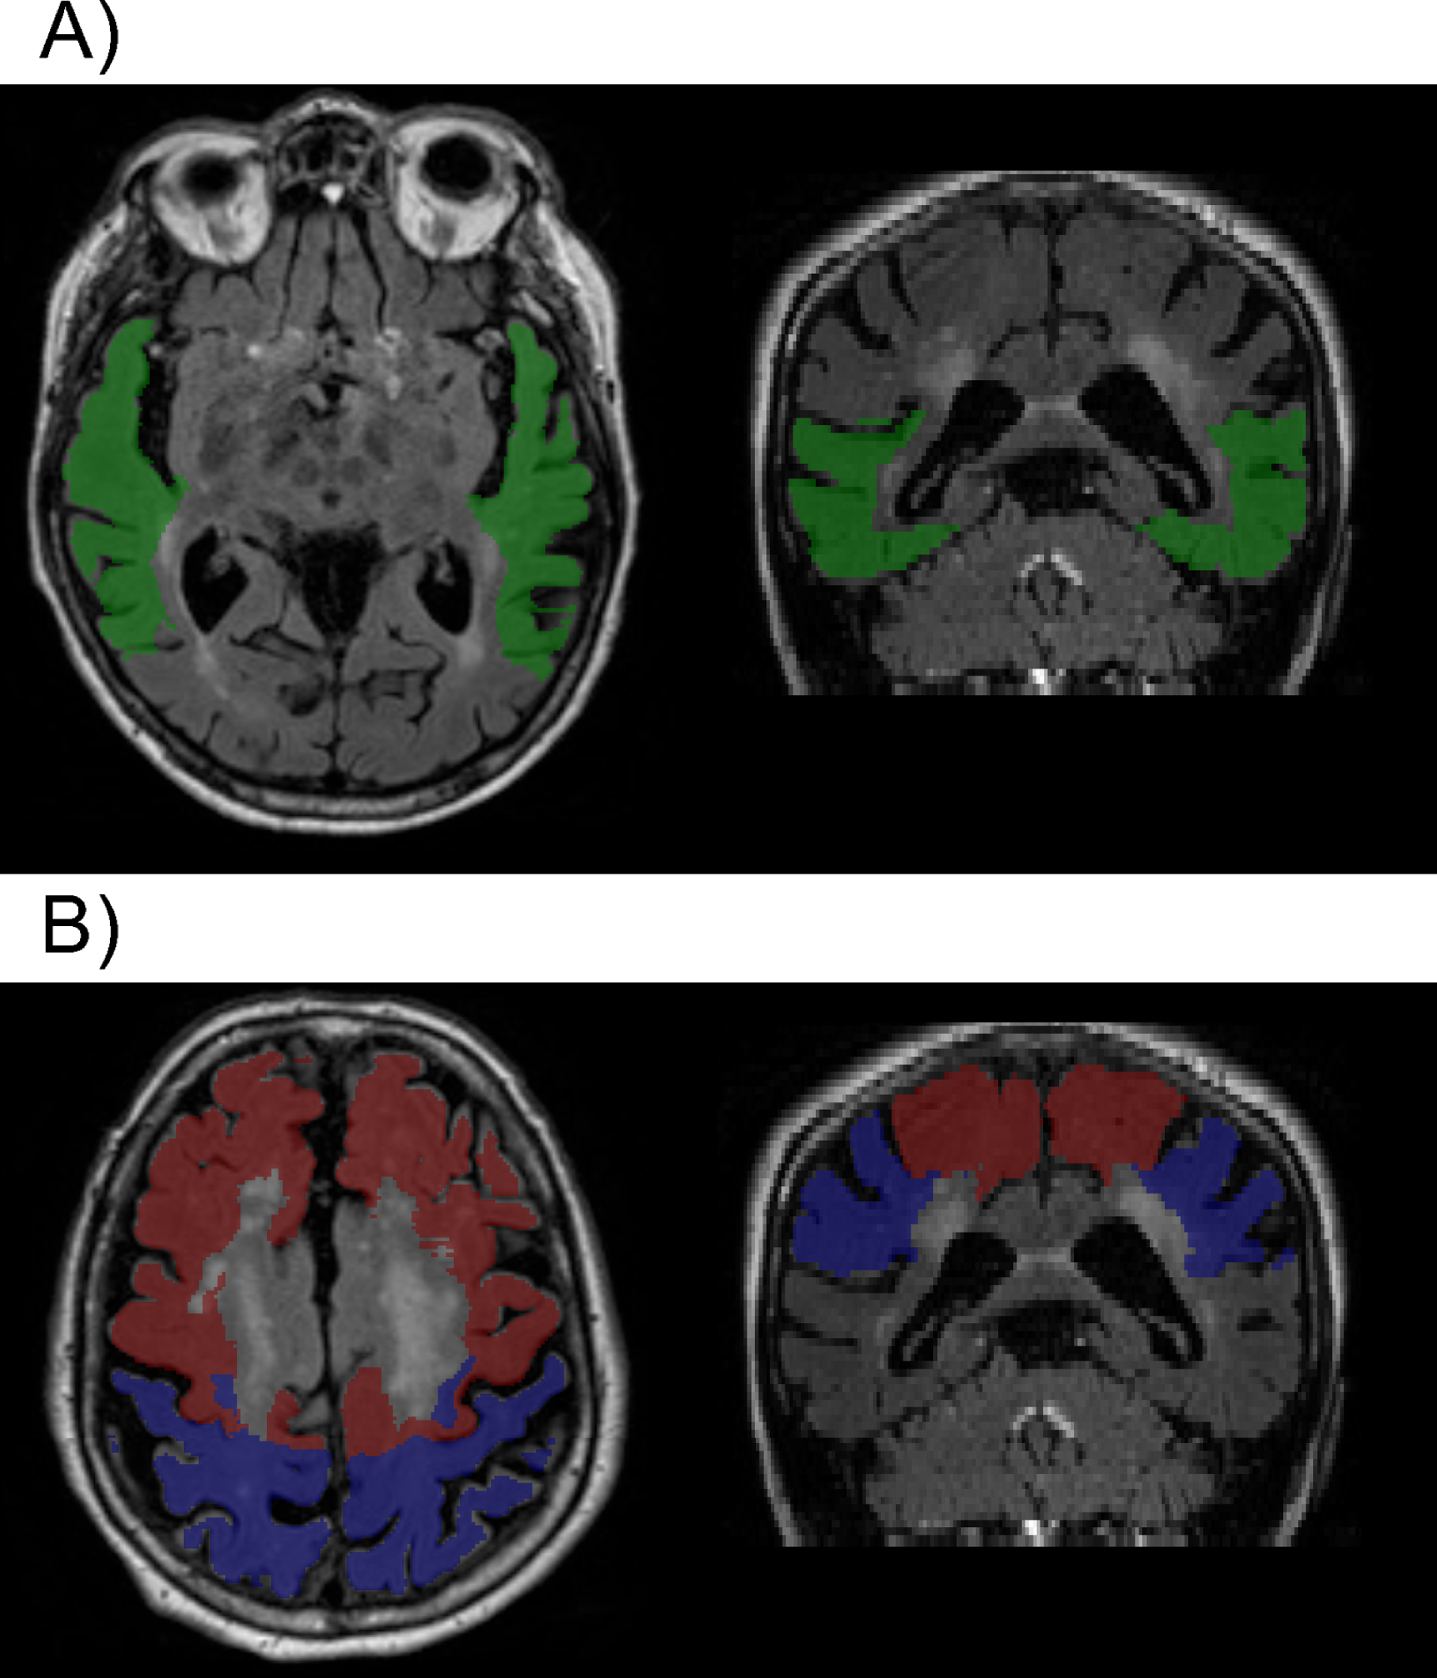 Example of segmentation showing A) the temporal region (green) where higher WMH volumes were associated with higher levels of p-tau and t-tau; and B) parietal (blue) and frontal (red) regions, where greater WMH volumes where associated with higher summary vascular risk scores (see text for details).